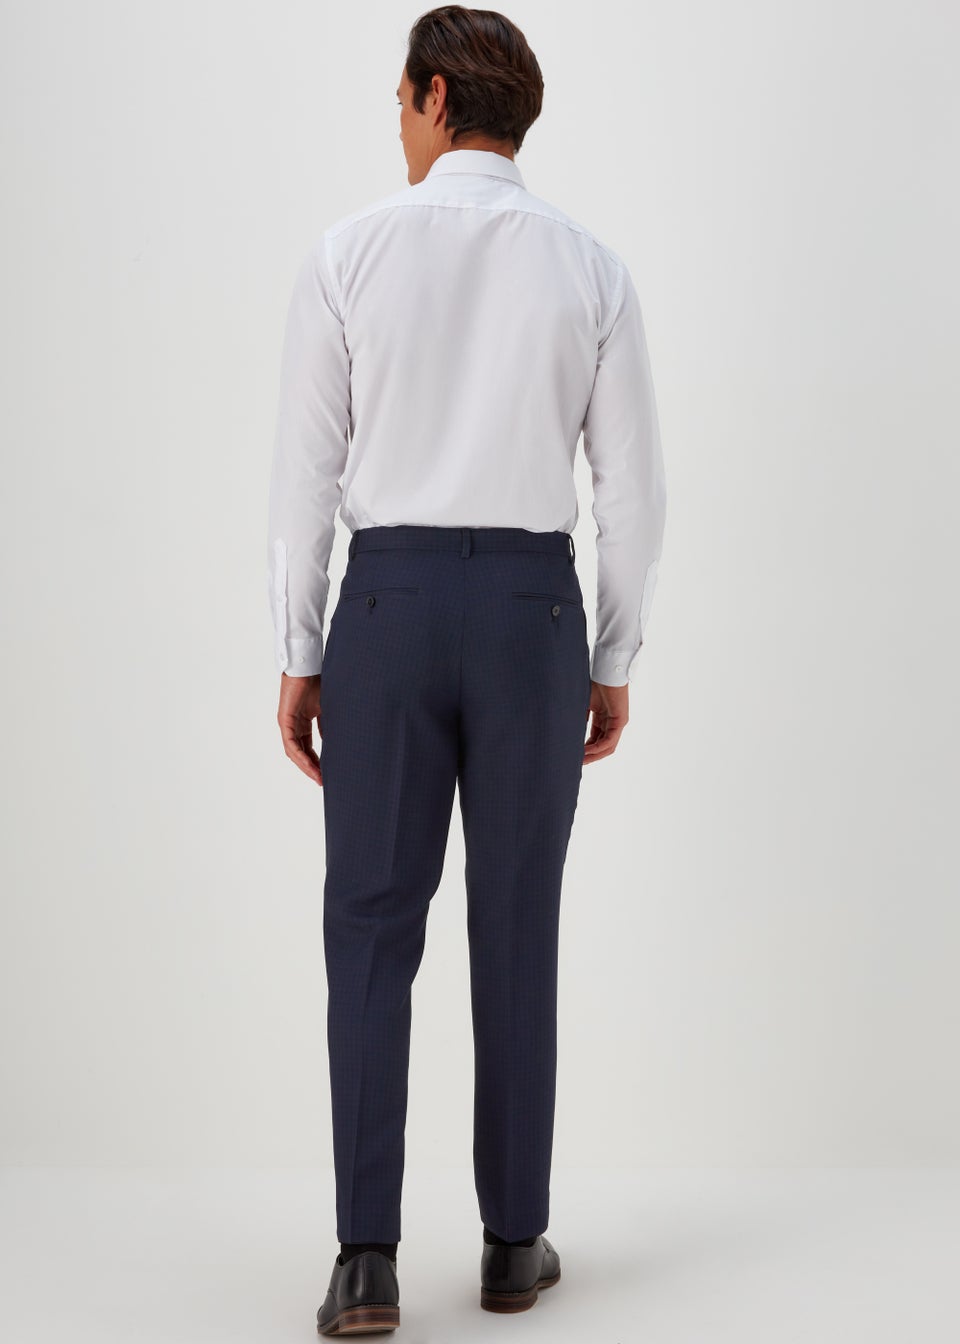 Taylor & Wright Tyne Navy Check Tailored Fit Trousers